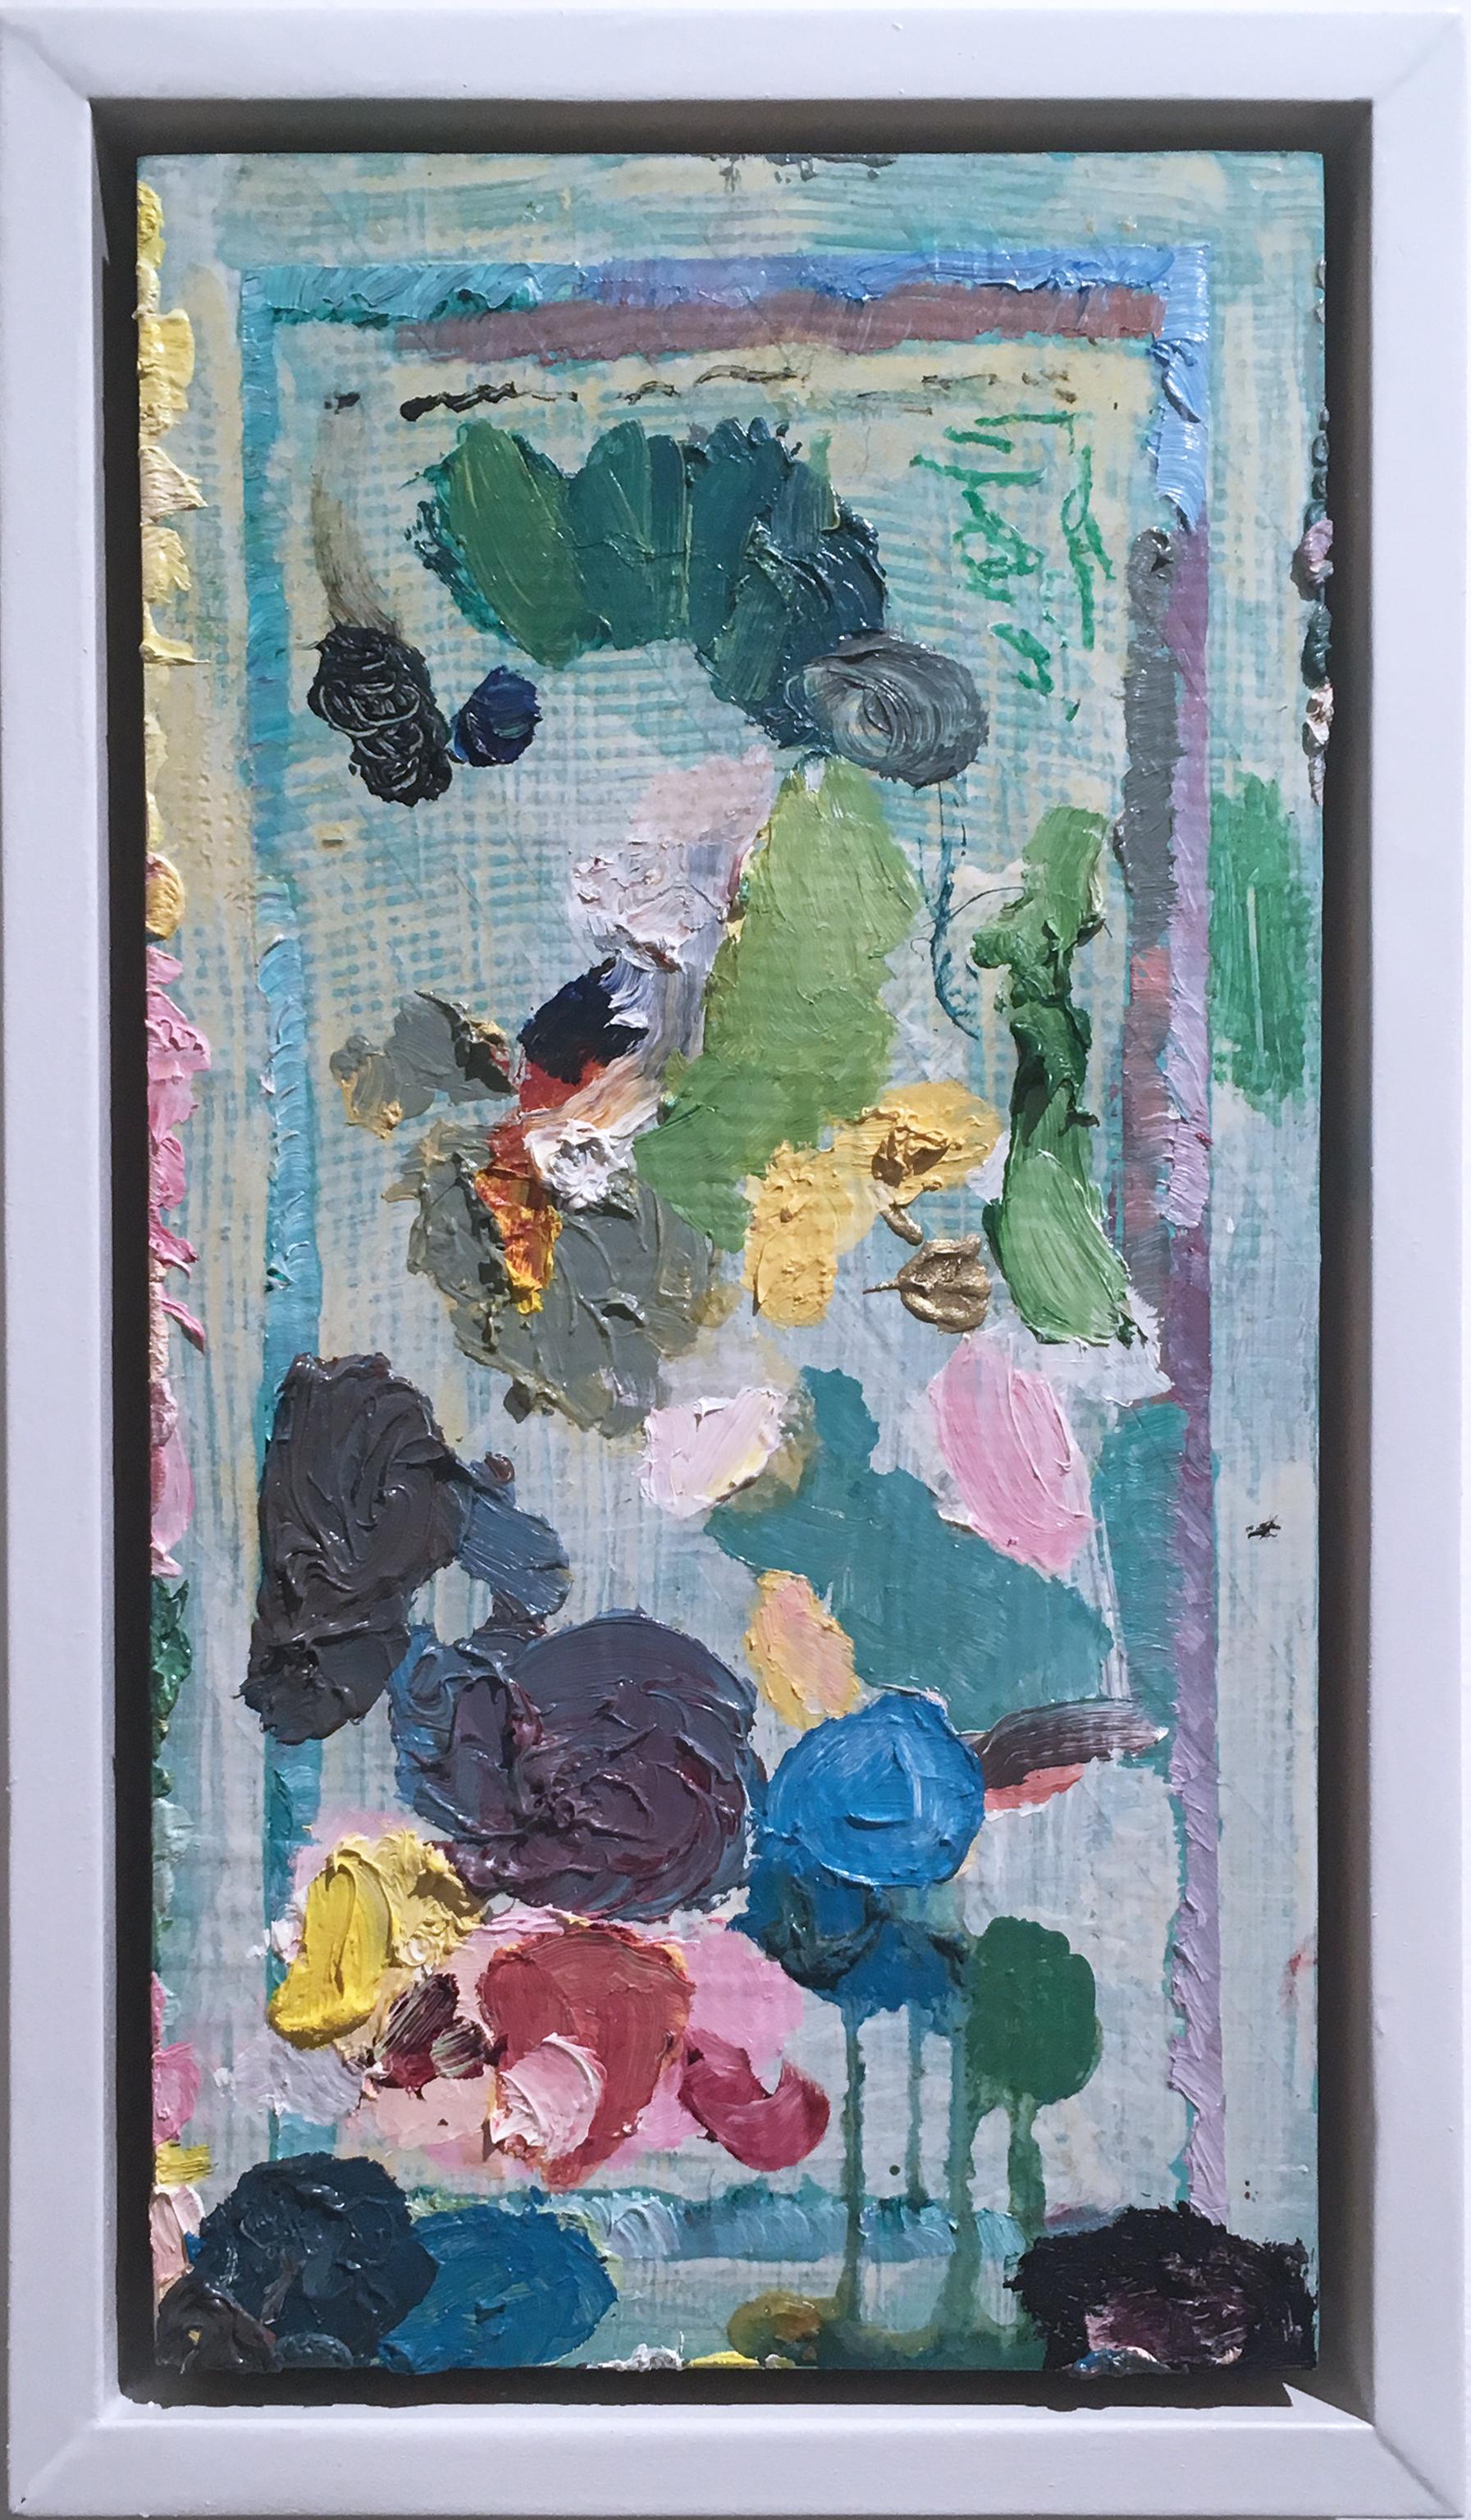 Just A Mess, 2018, acrylic, oil, pastel, panel, green, pink, abstract, frame